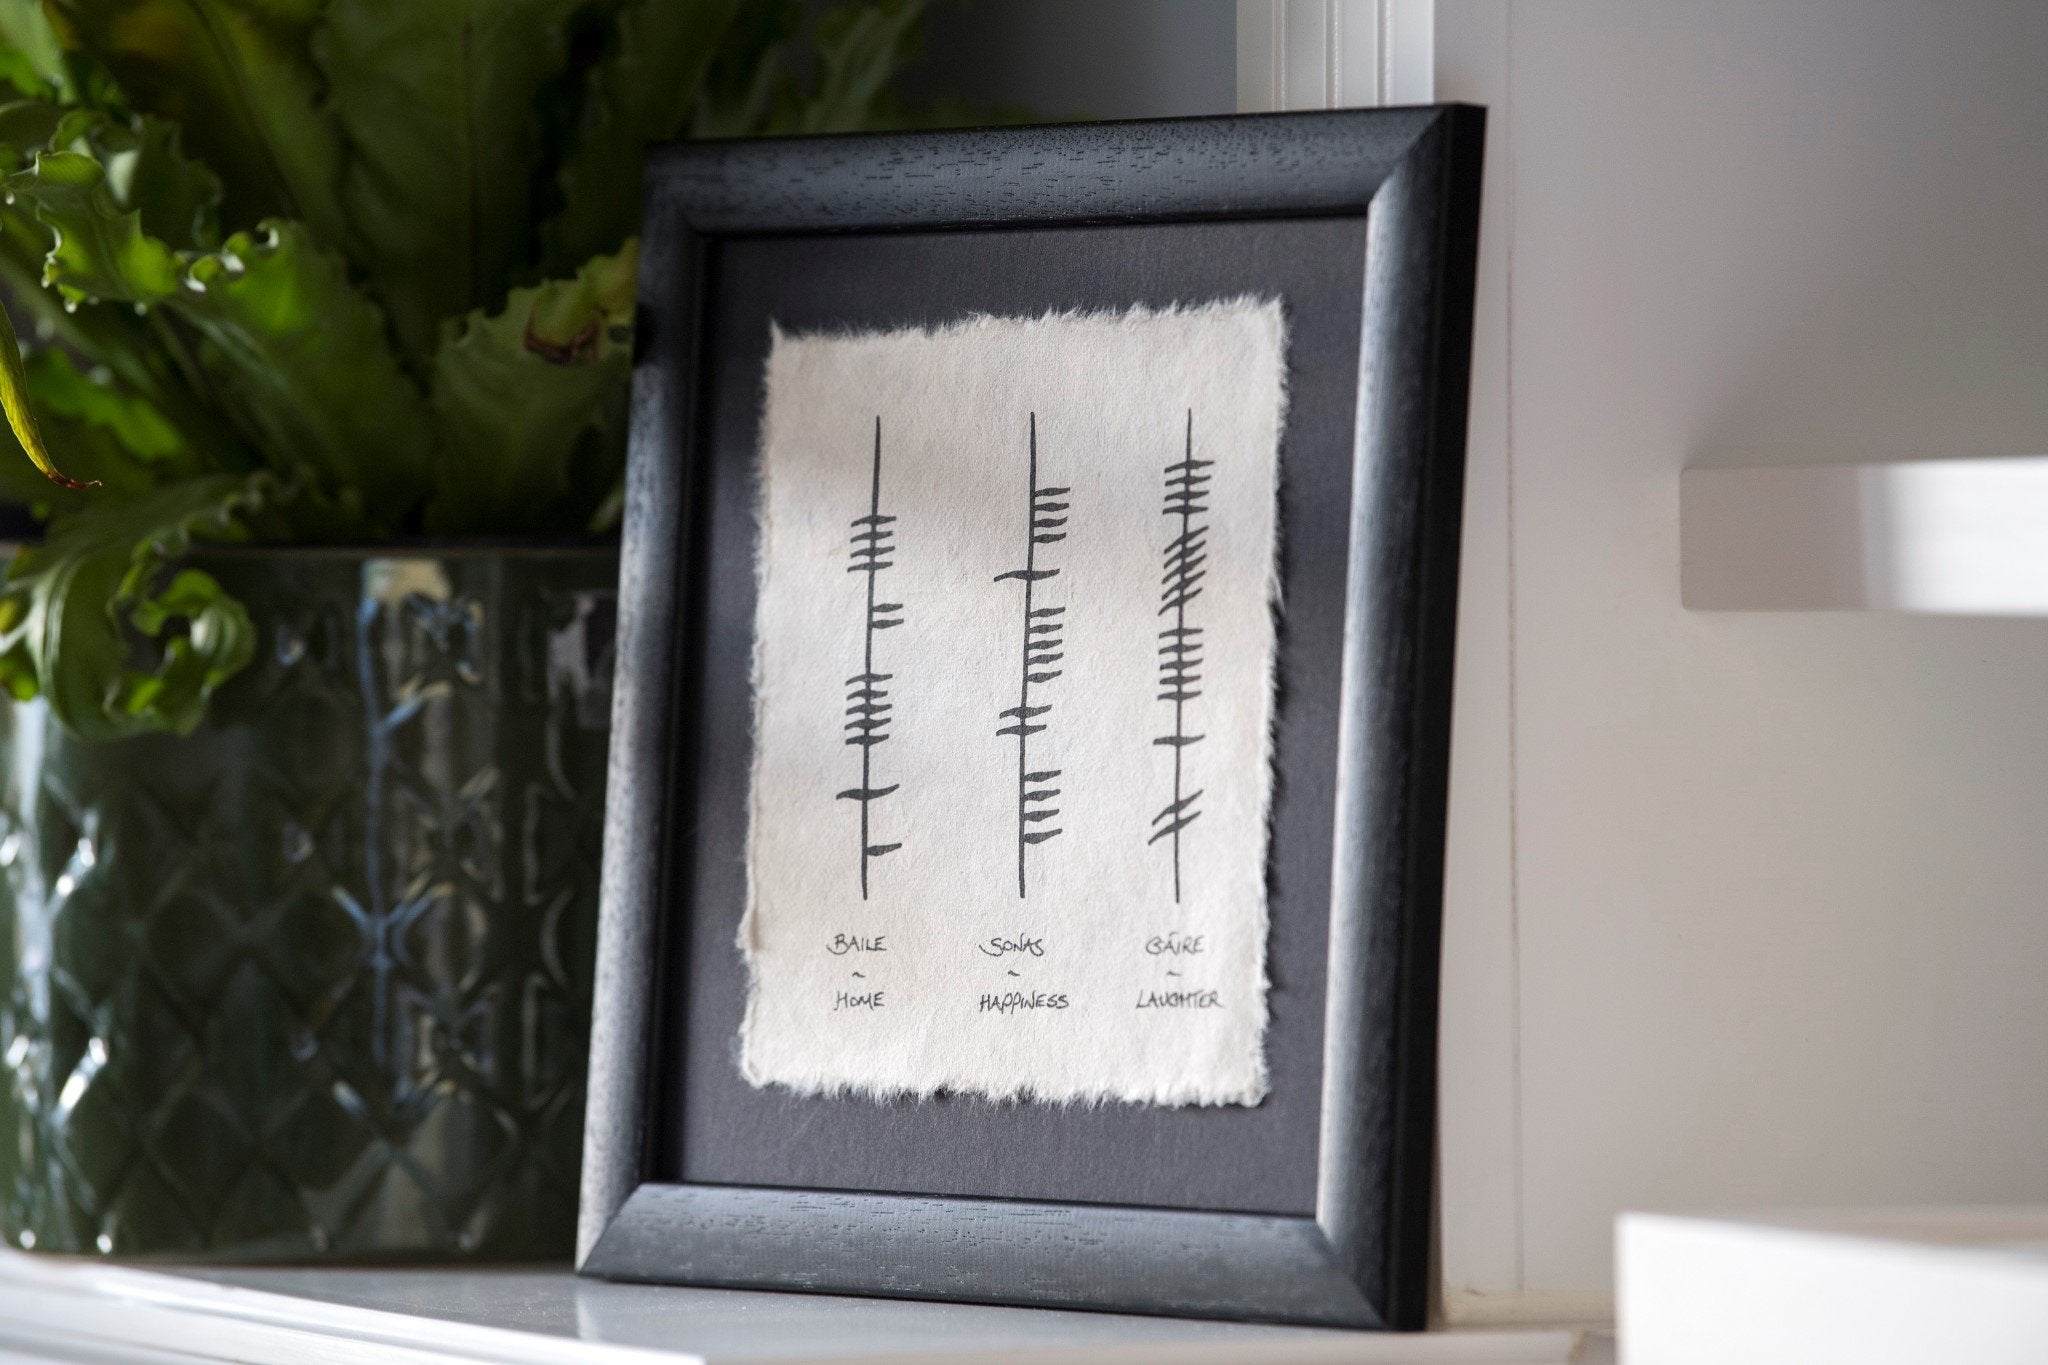 Ogham Wishes - Home/Happiness/Laughter - Small Frame